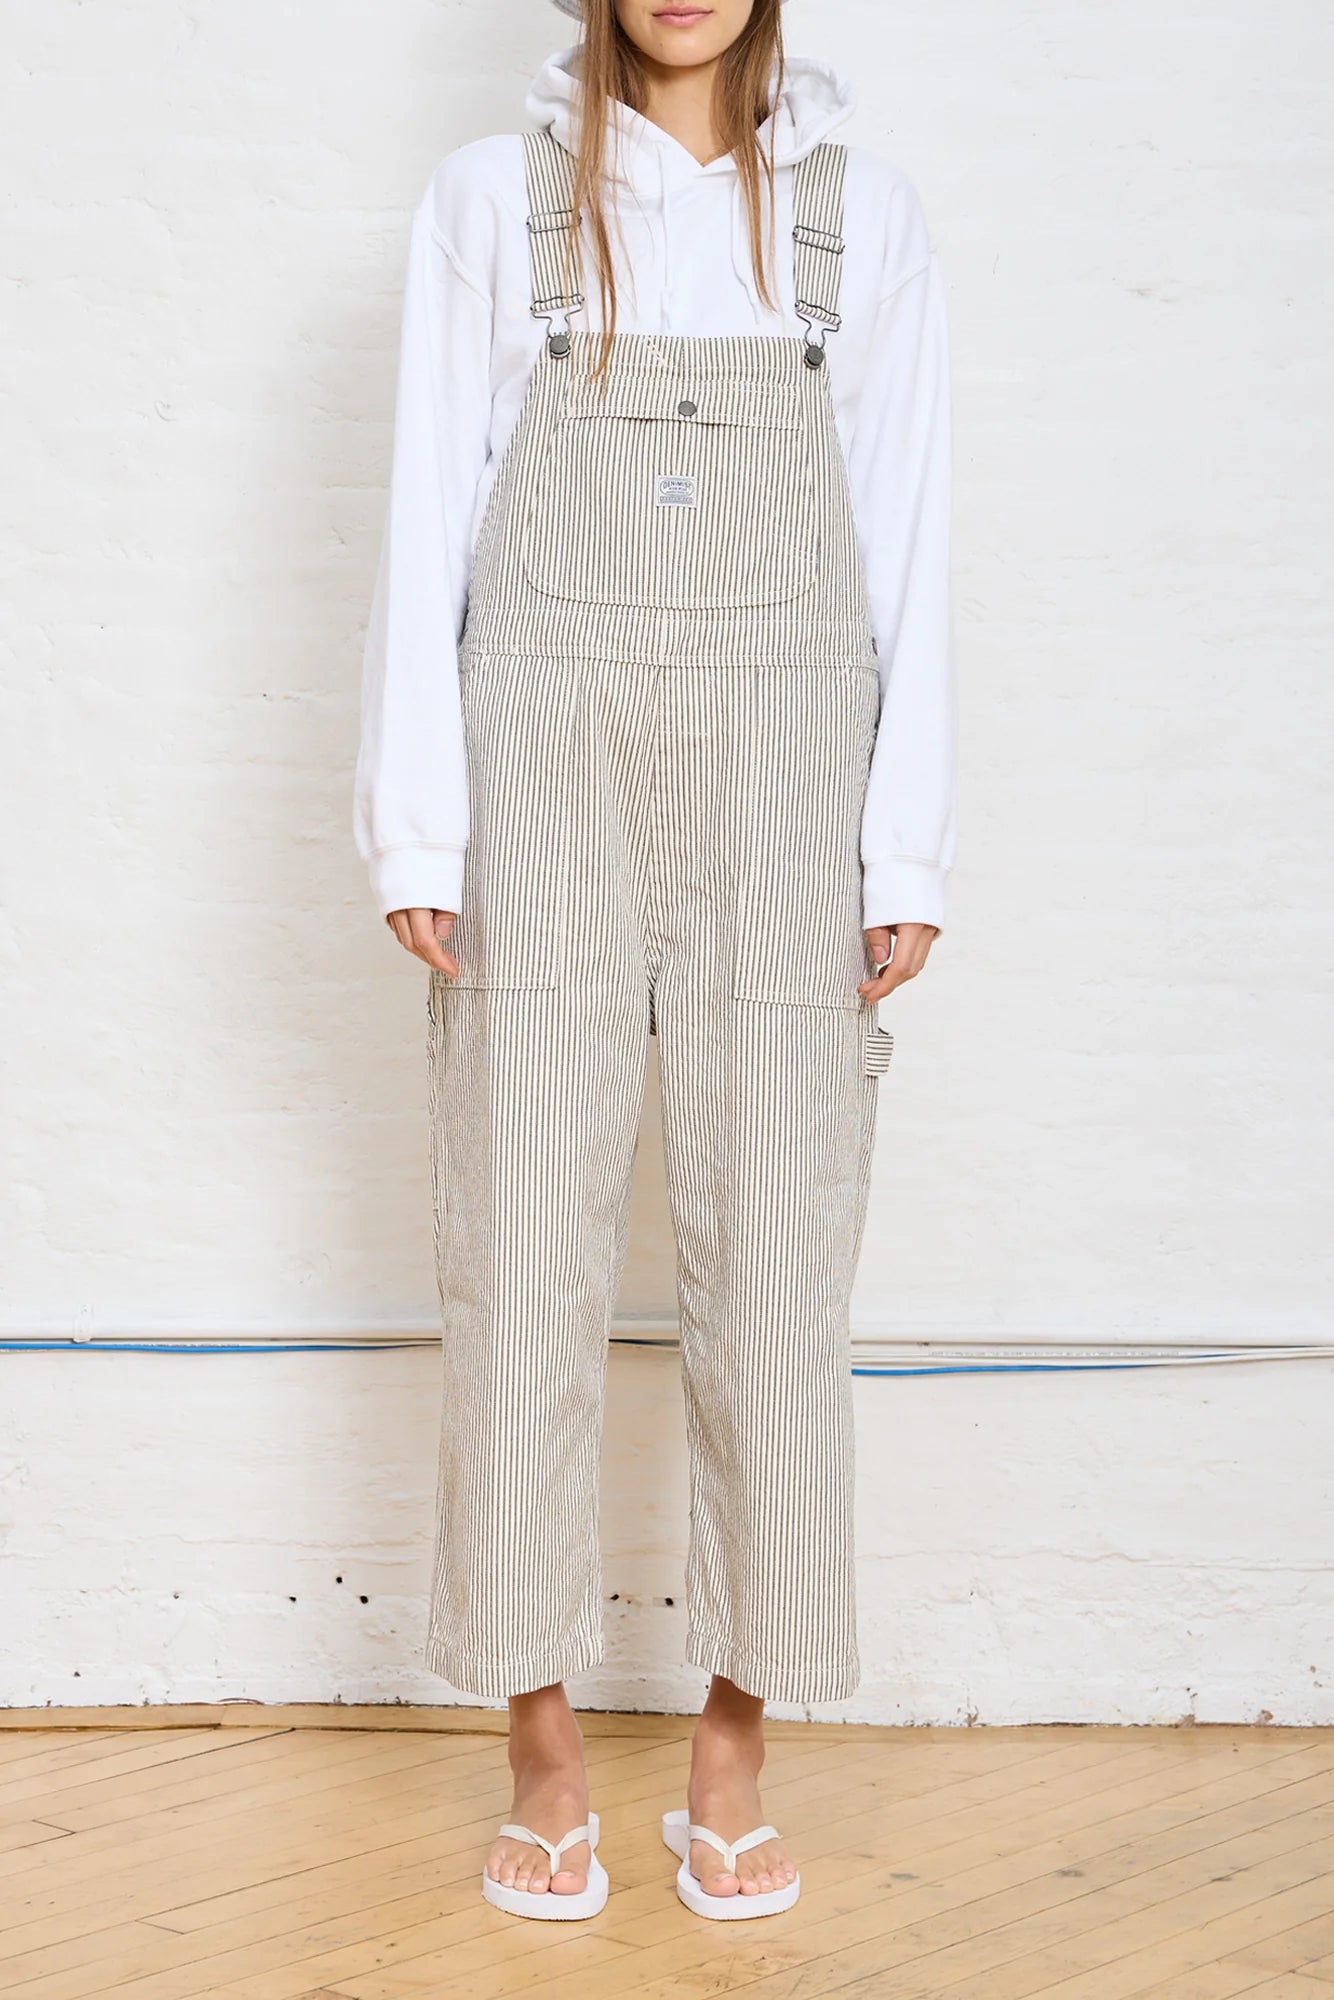 RELAXED OVERALL IN RAILROAD GREY - Romi Boutique